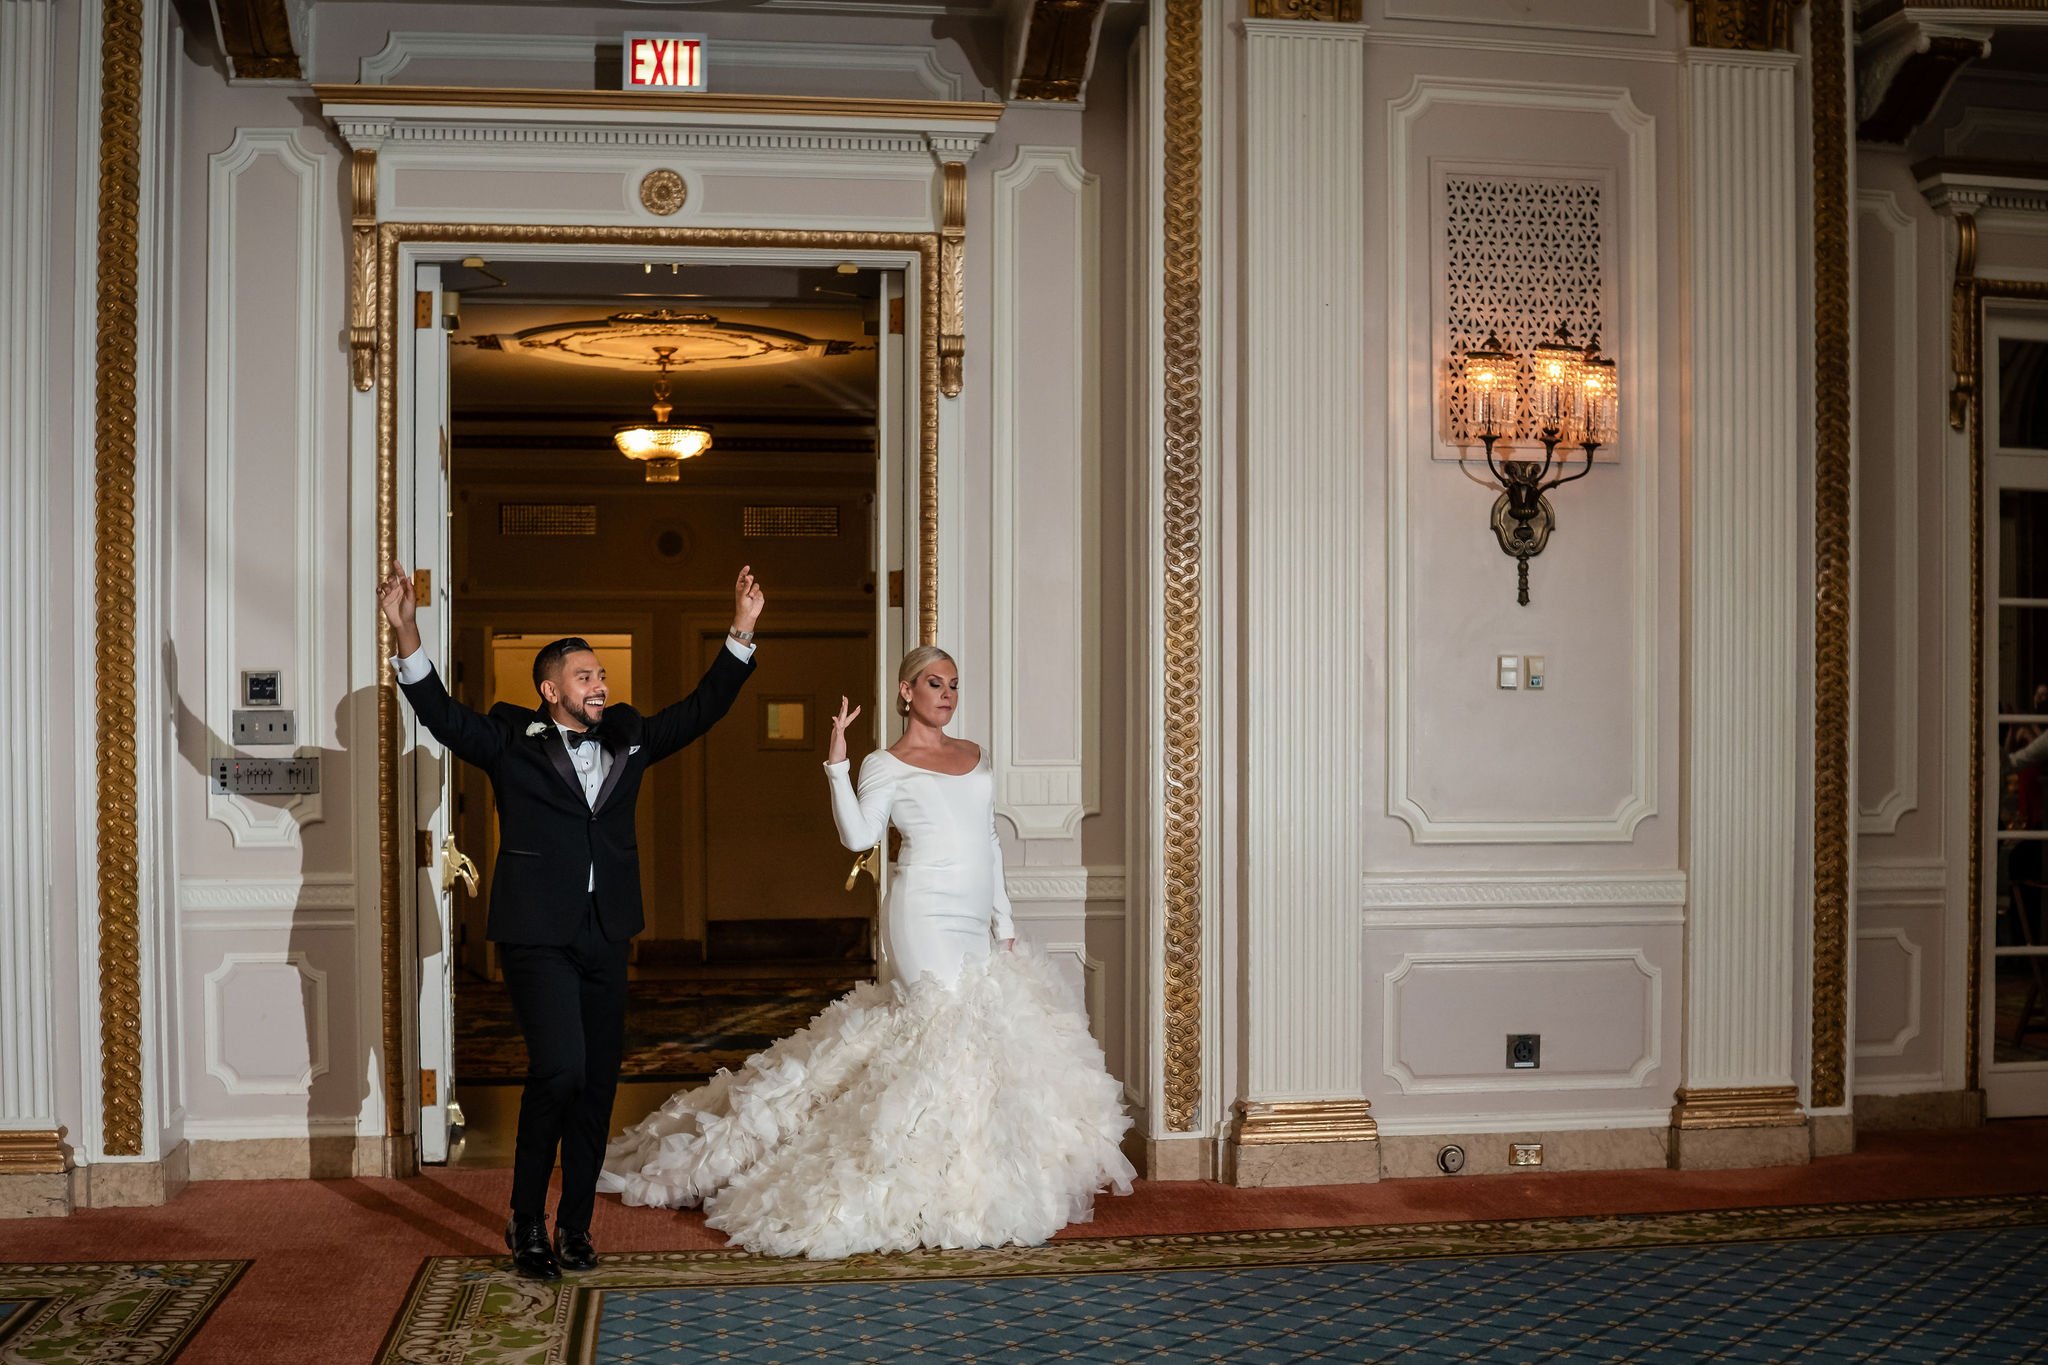 grand entrance at a ball room wedding at the chateau Laurier